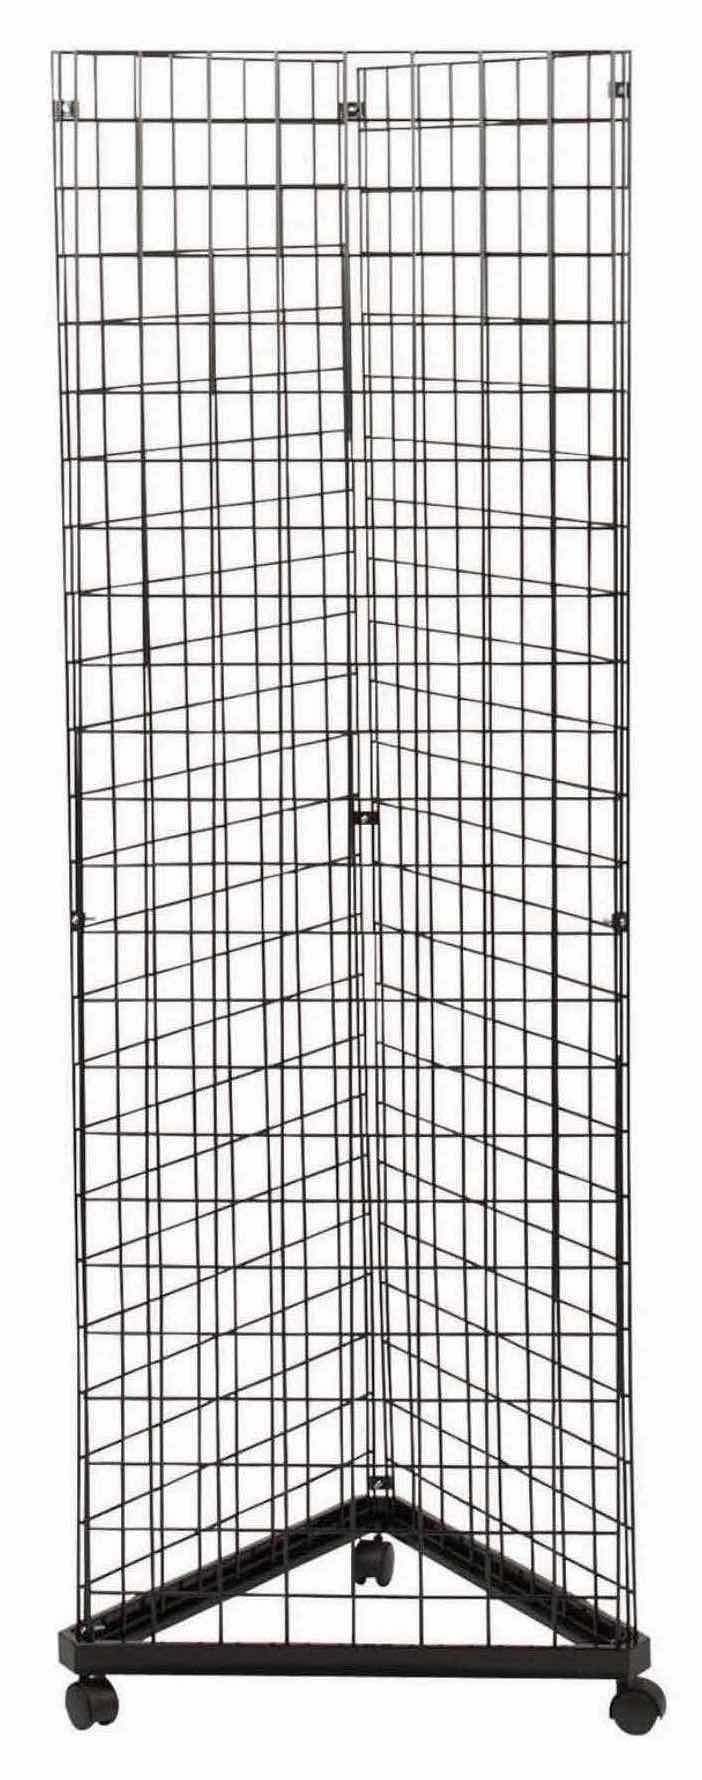 Photo 1 of $170 BLACK TRIANGLE WIRE GRID & GRID WALL TOWER W BASE & CASTER WHEELS (2’ x 6’ H6.6’)